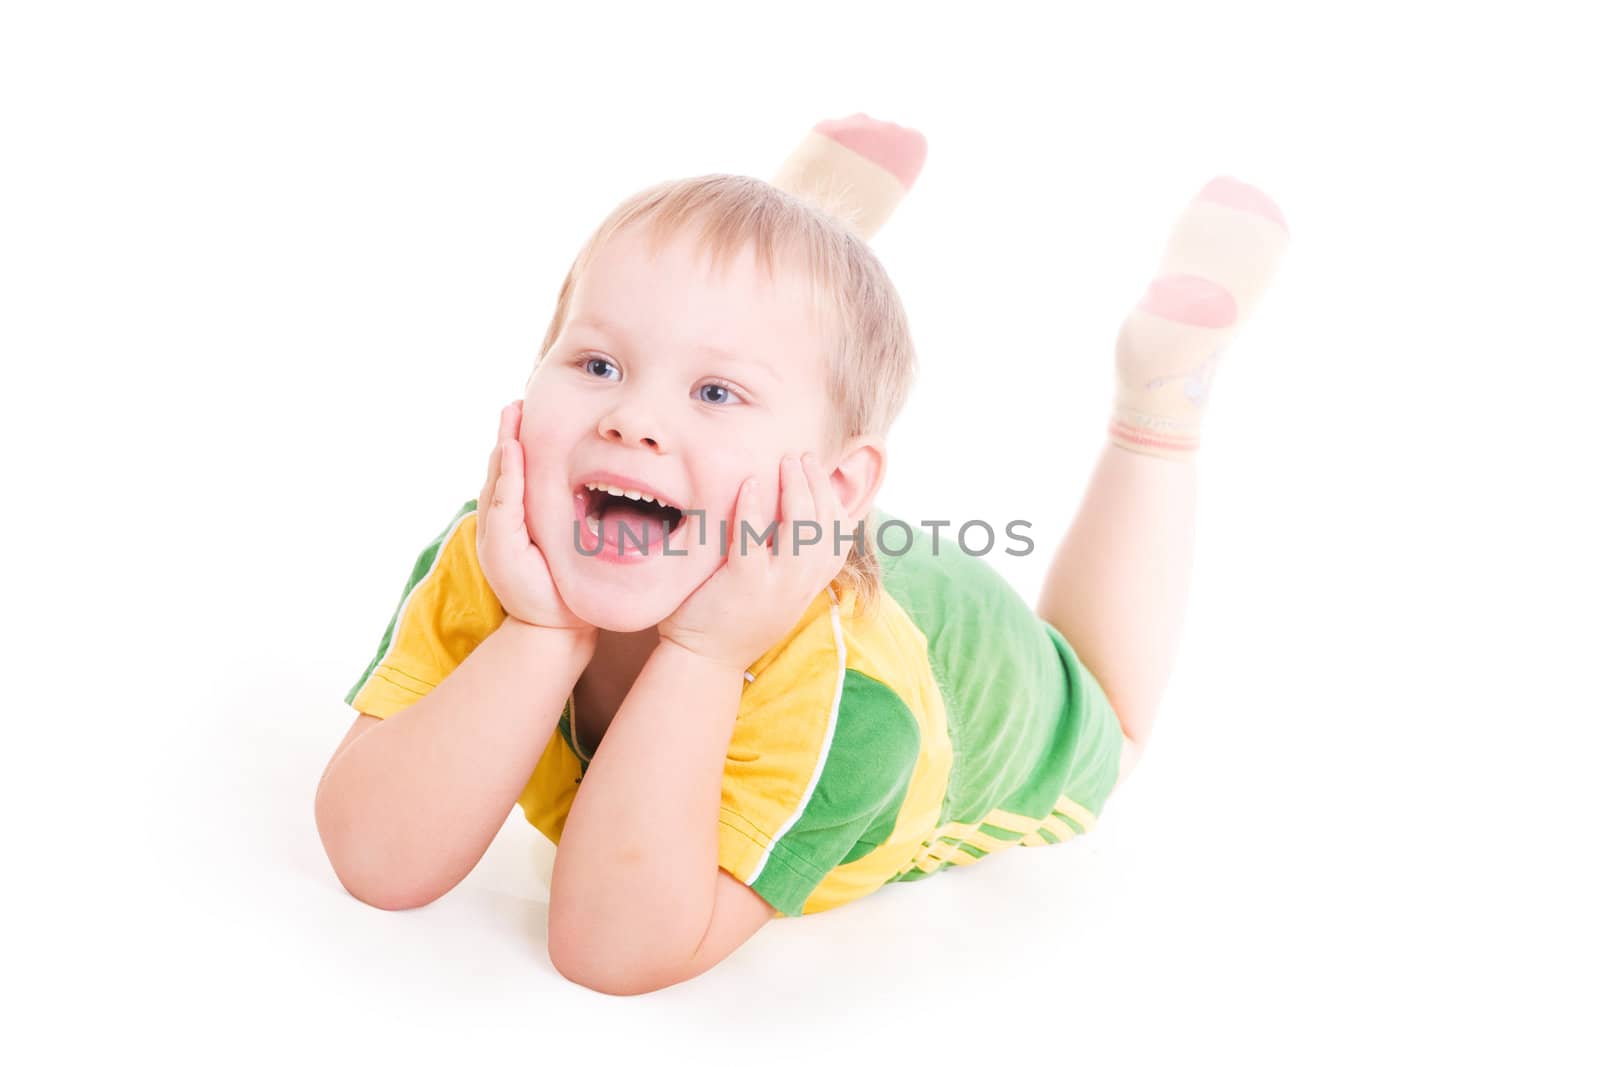 a smiling boy with the open mouth on the floor by vsurkov